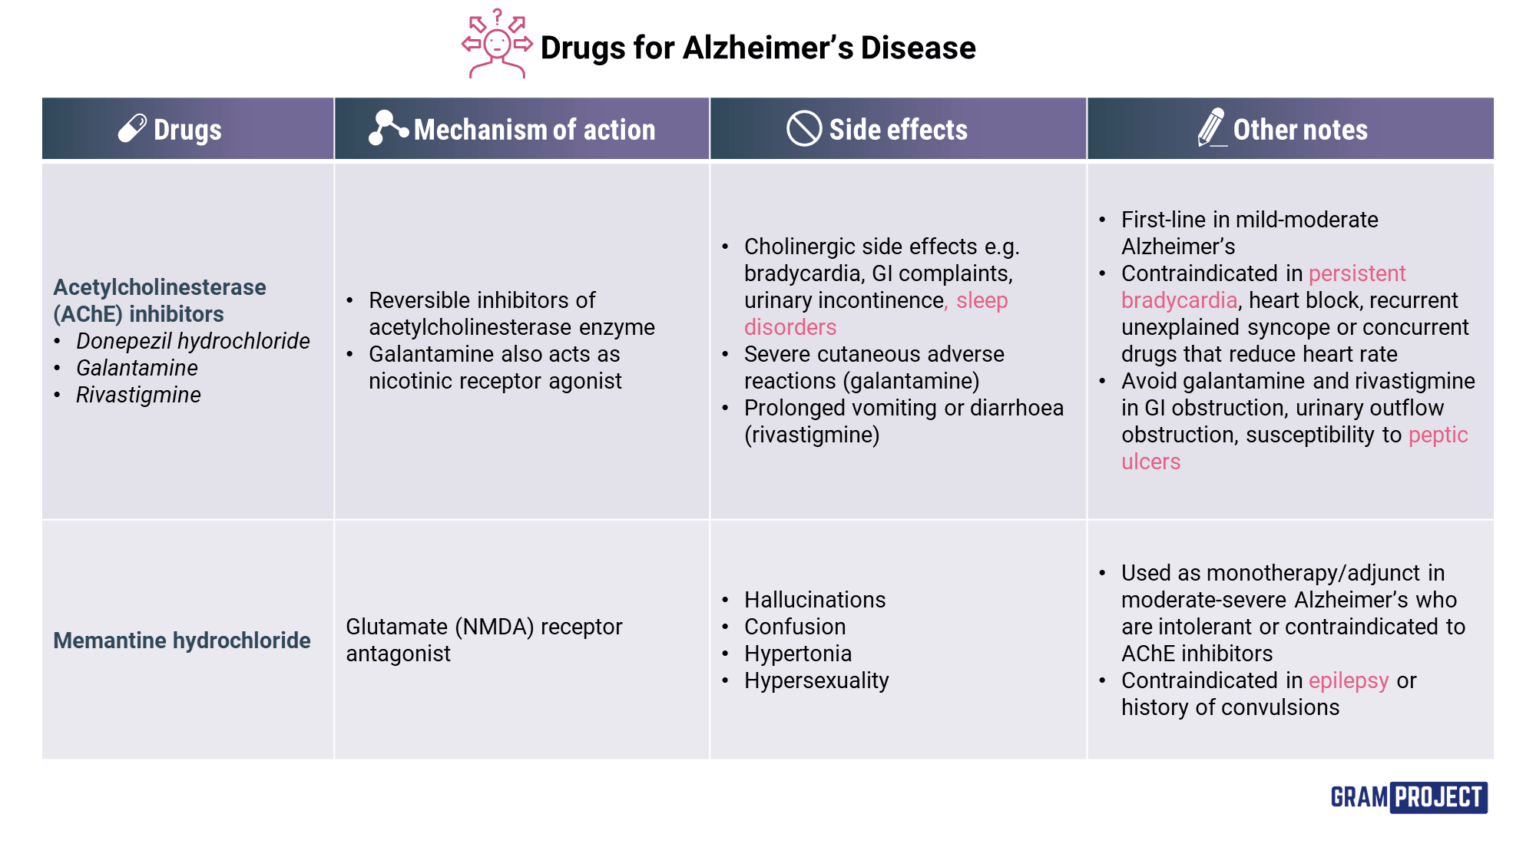 Summary table of commonly used drugs for Alzheimer's Disease